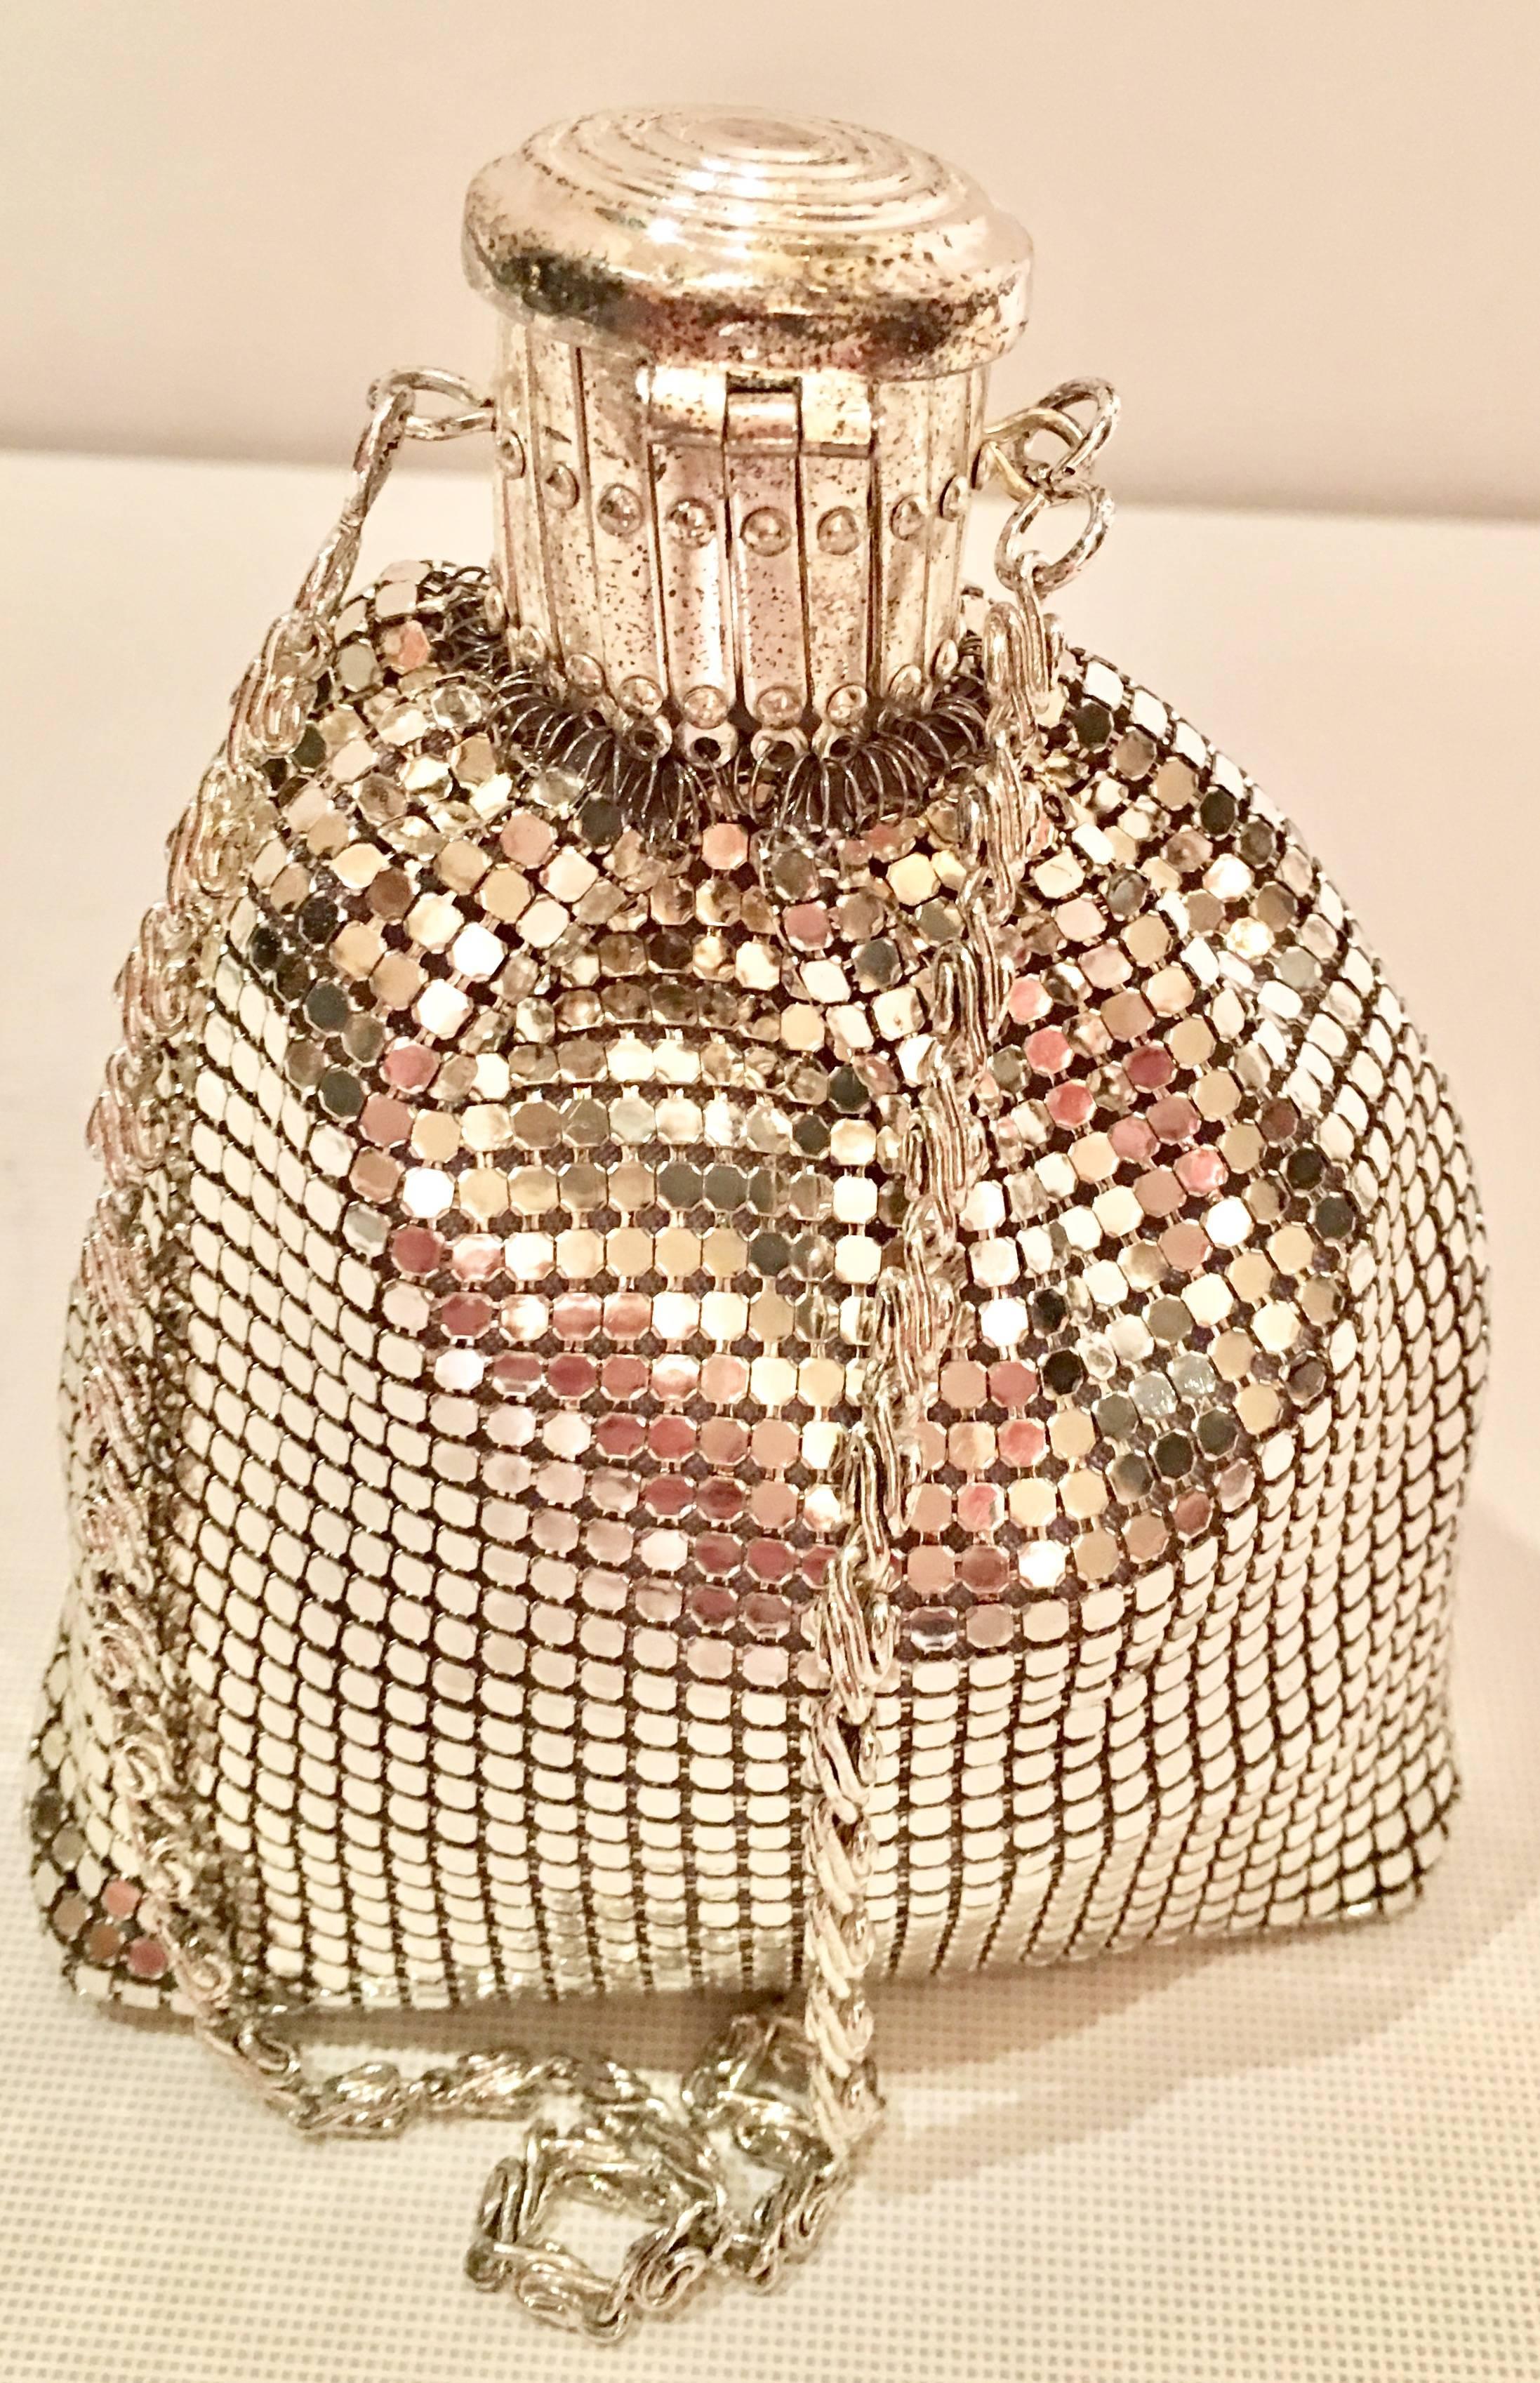 Whiting & Davis Silver Metal Mesh gate top wristlet beggars purse. Features a metal mesh body with a silver plate gate top snap closure with spiral motif. Fully lined in silver satin lining and the bottom is reinforced with a hard interior panel.